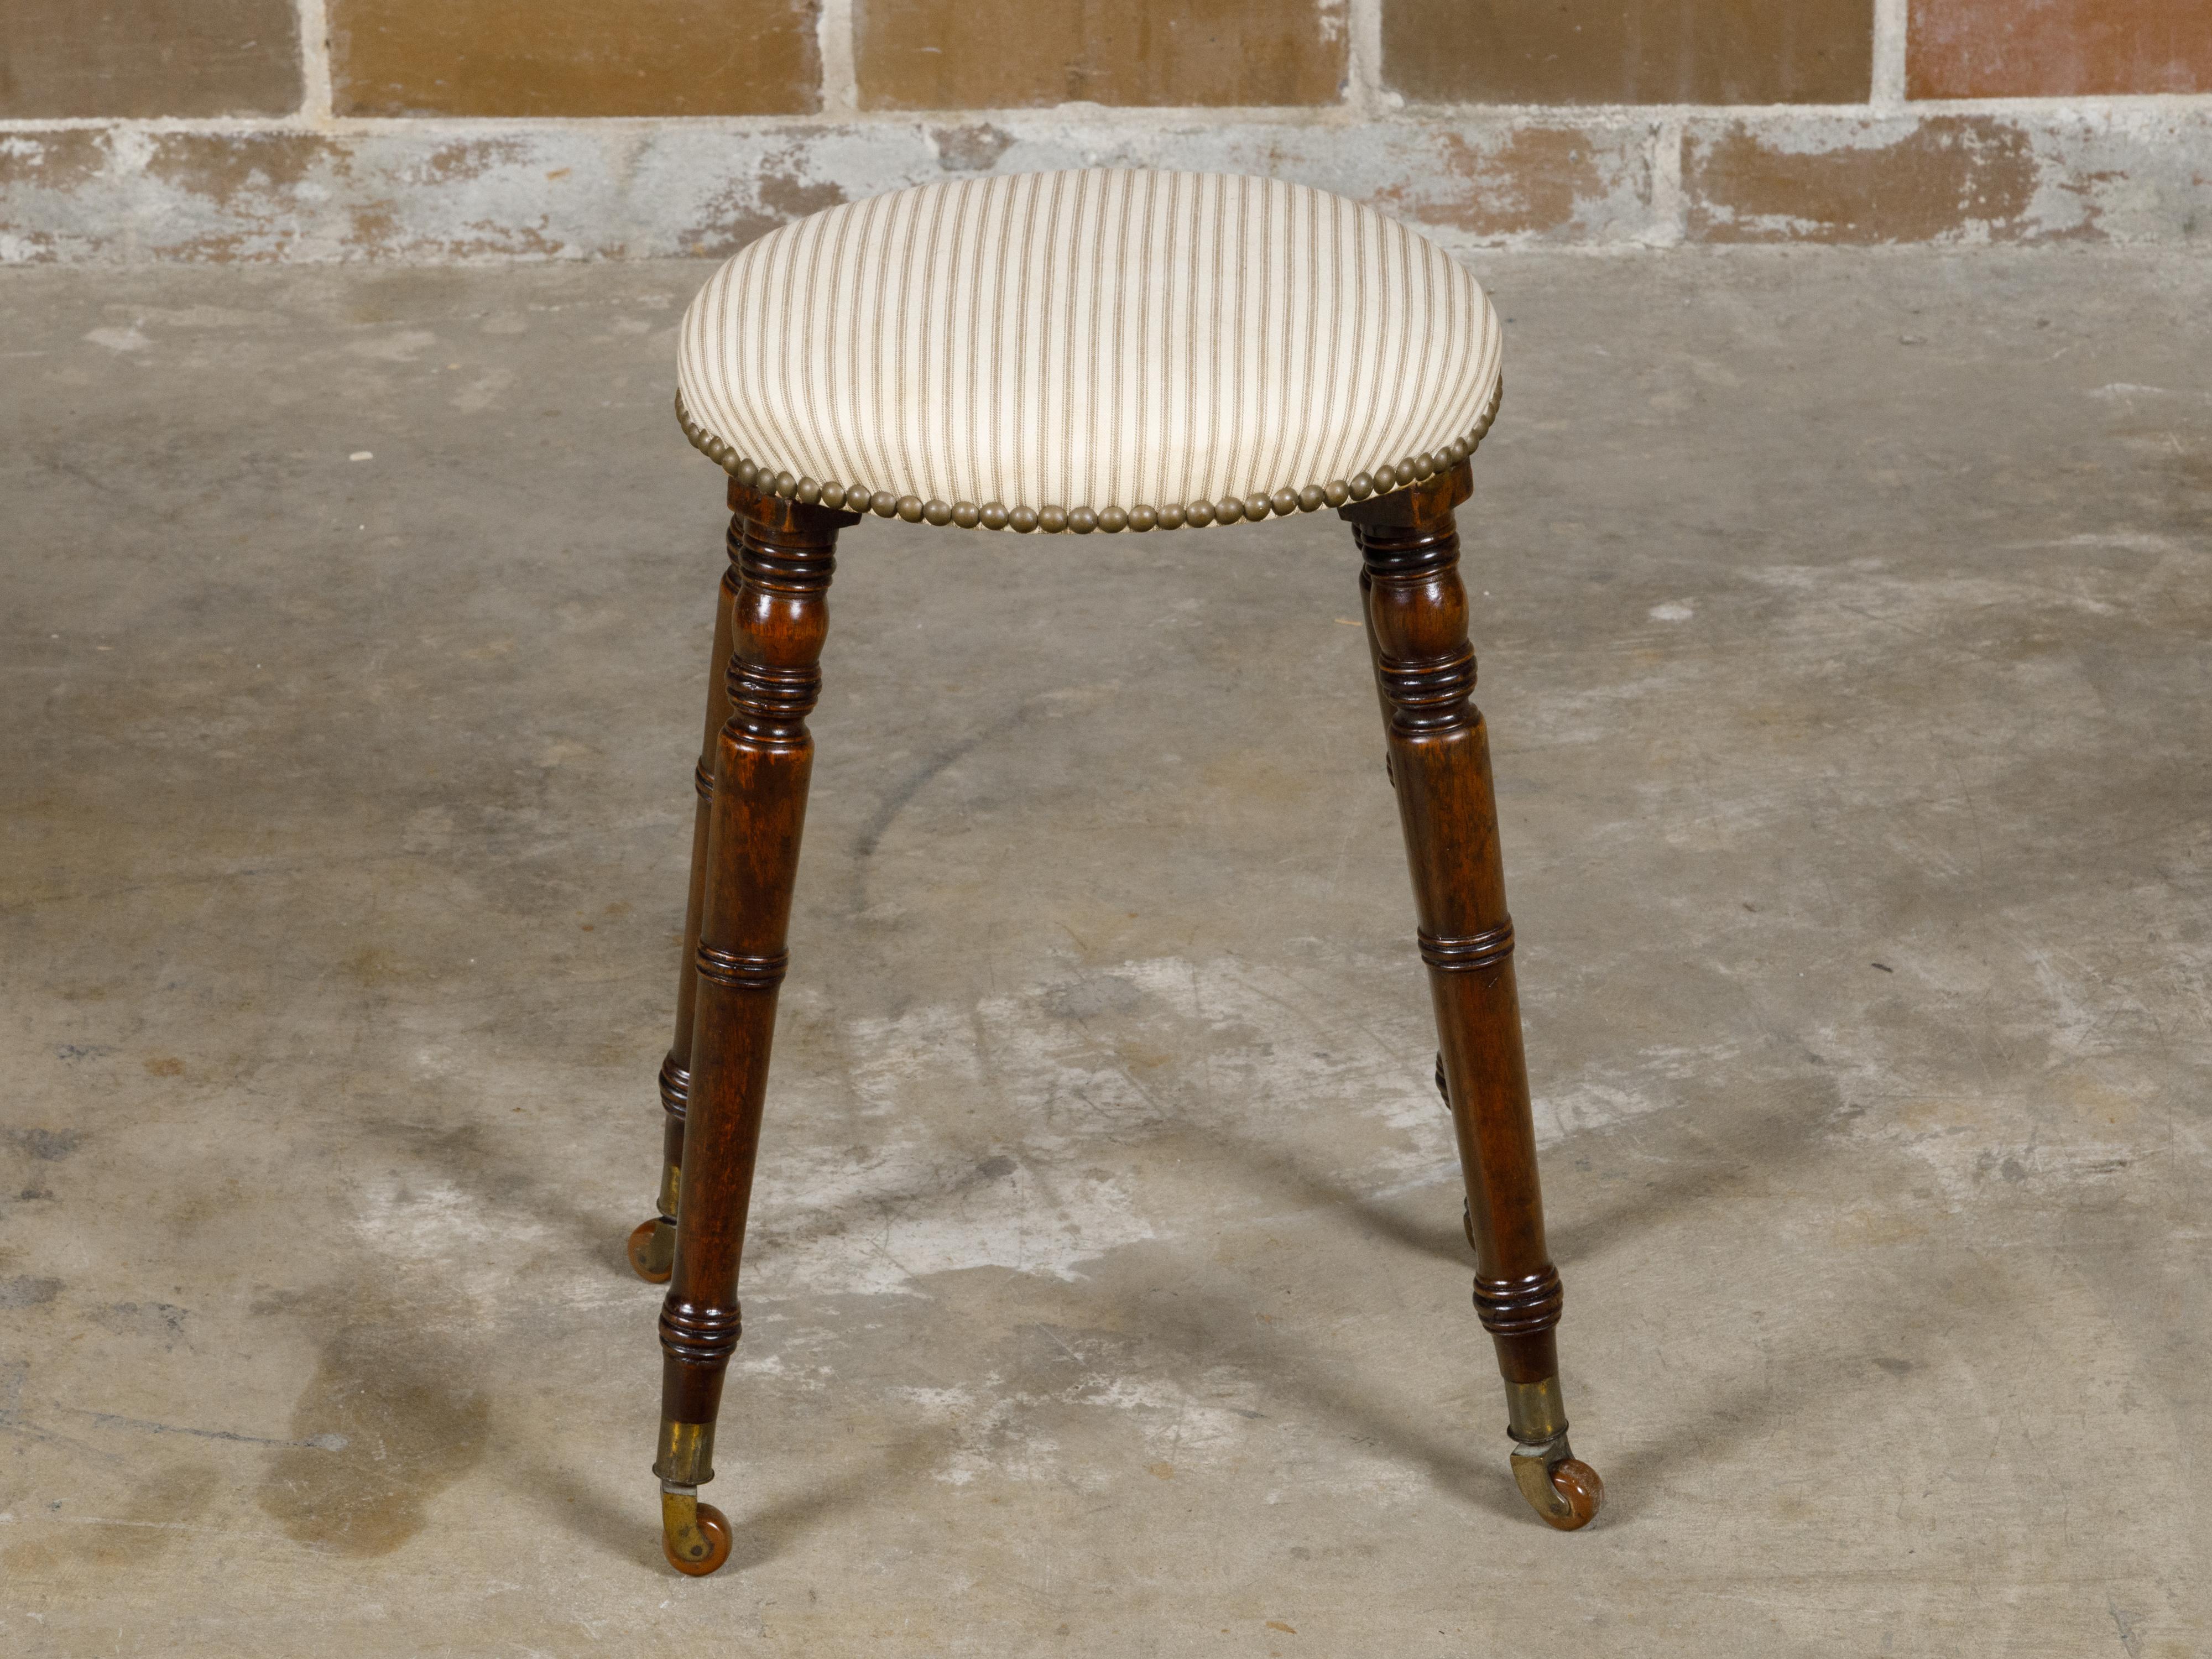 An English Victorian period oak stool from the 19th century with oval upholstered seat, turned legs resting on casters. Step into the charm and craftsmanship of the 19th century with this English Victorian period oak stool, a piece that beautifully